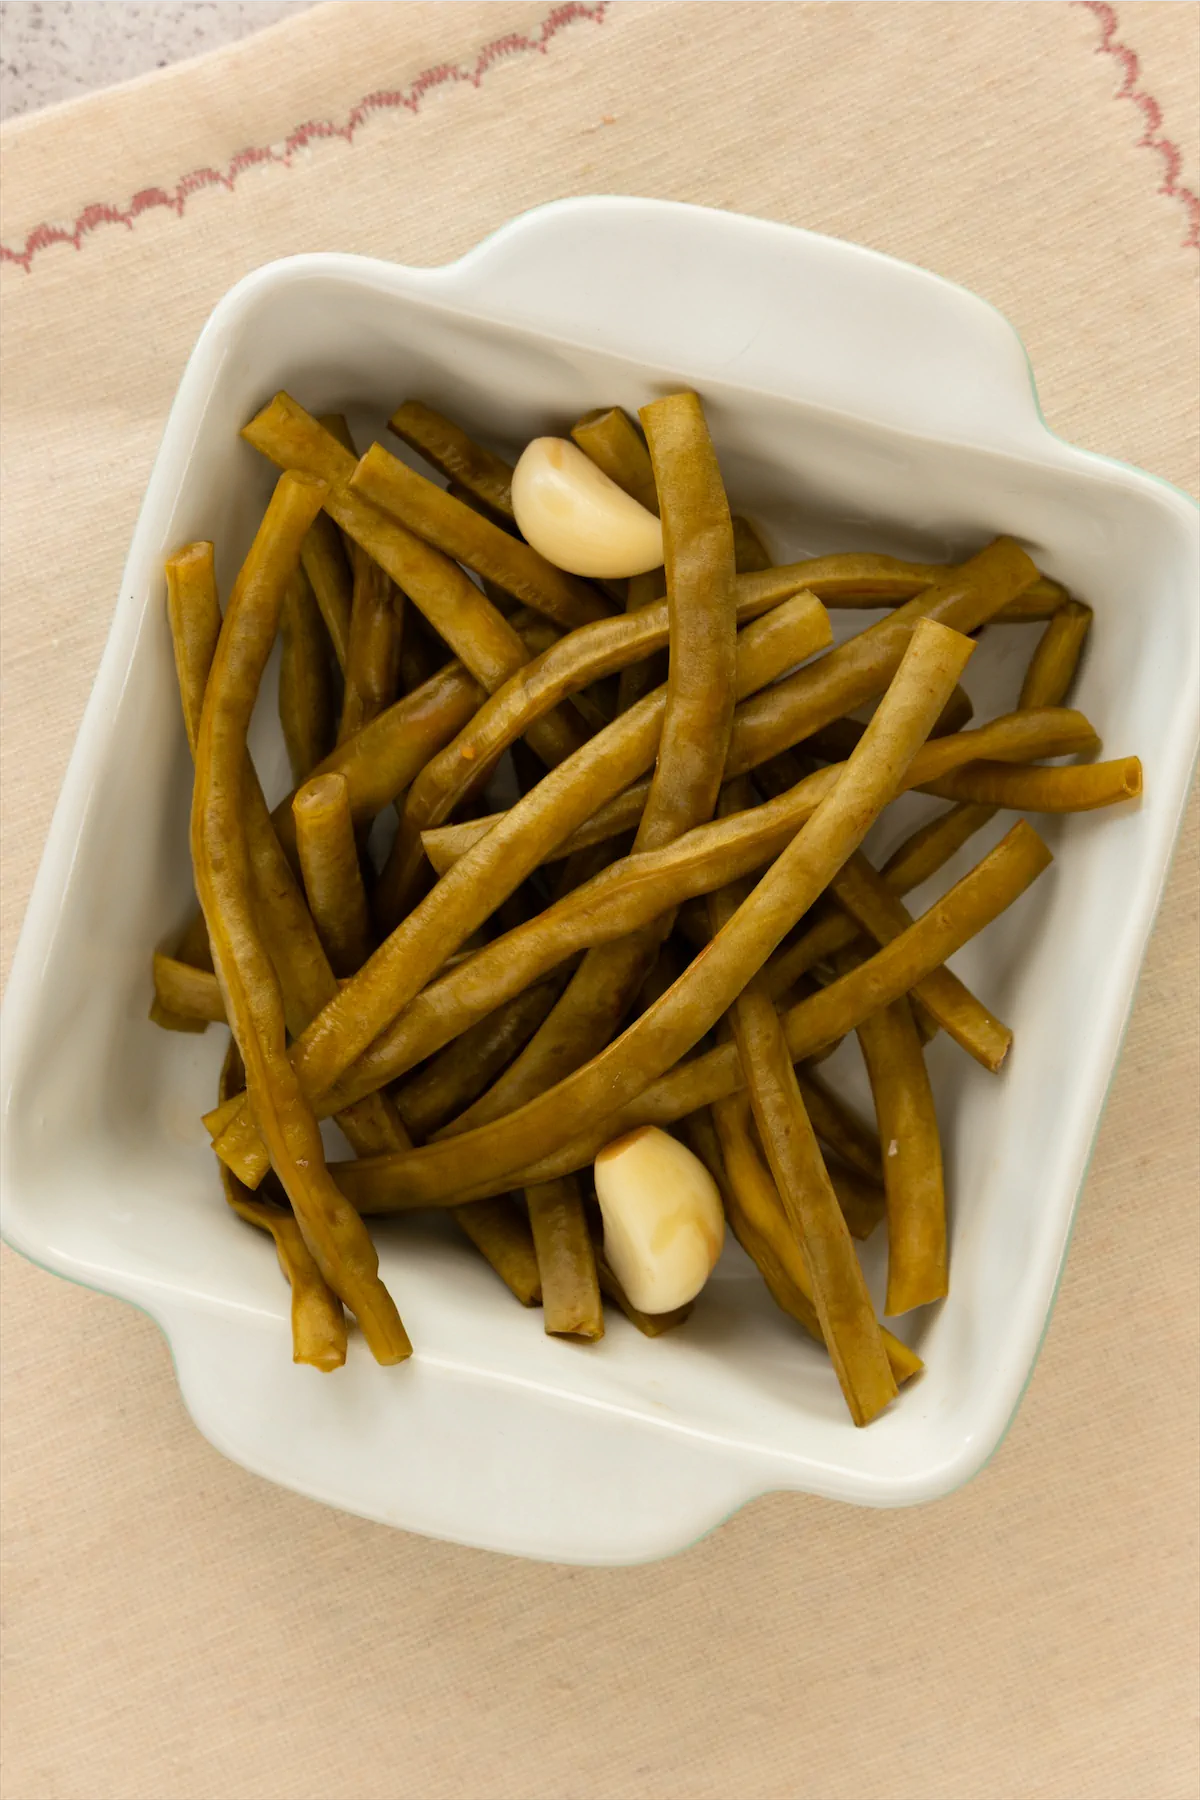 A square white bowl containing homemade pickled green beans, along with a couple of garlic cloves.